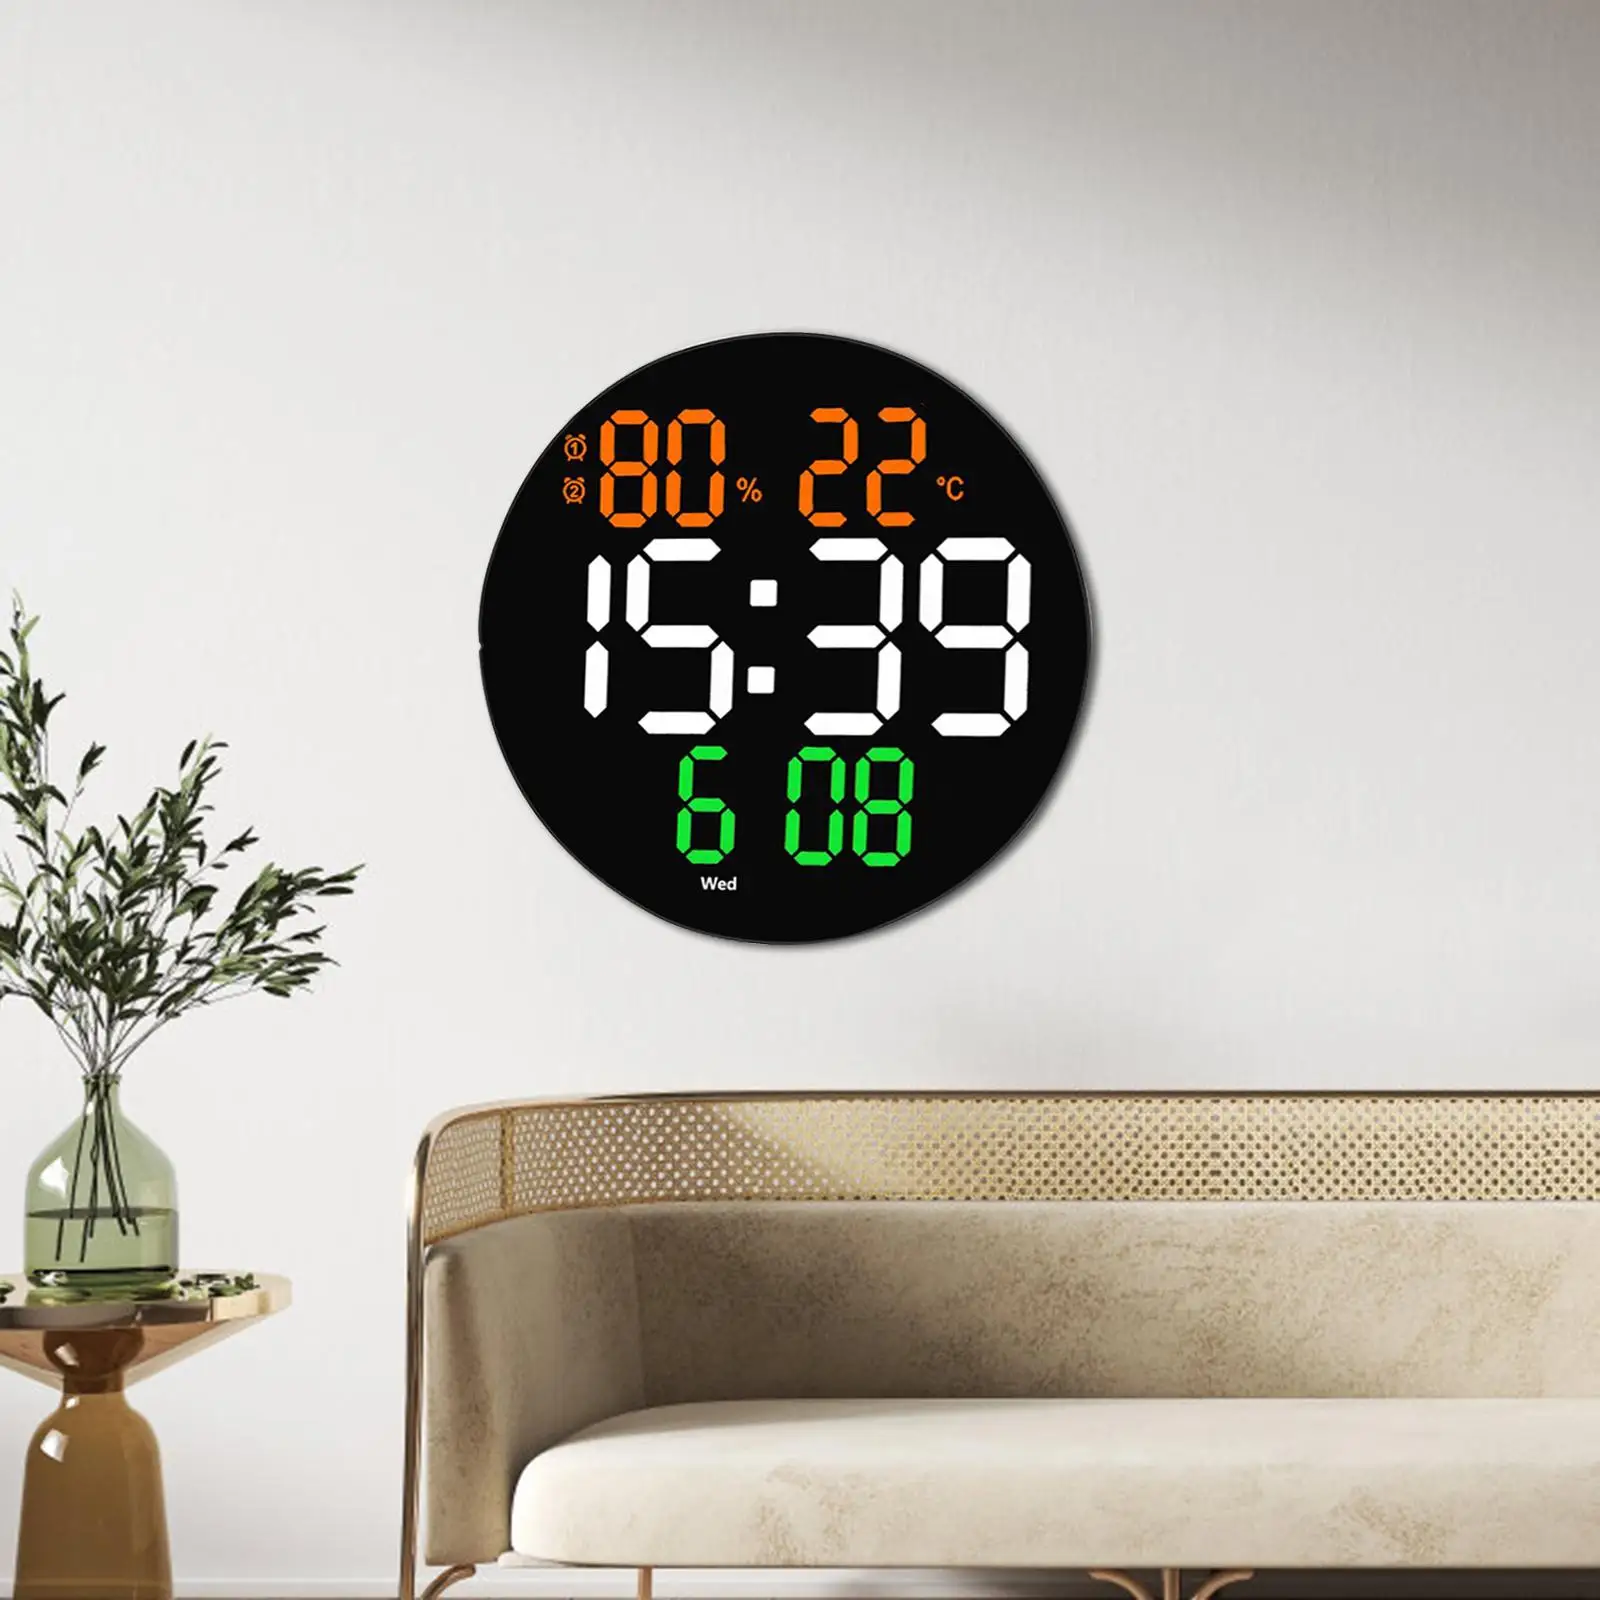 Digital Wall Clock Dual Alarms Indoor Temperature Humidity Adjustable Brightness Electronic Clocks for Elderly Adults Kitchen